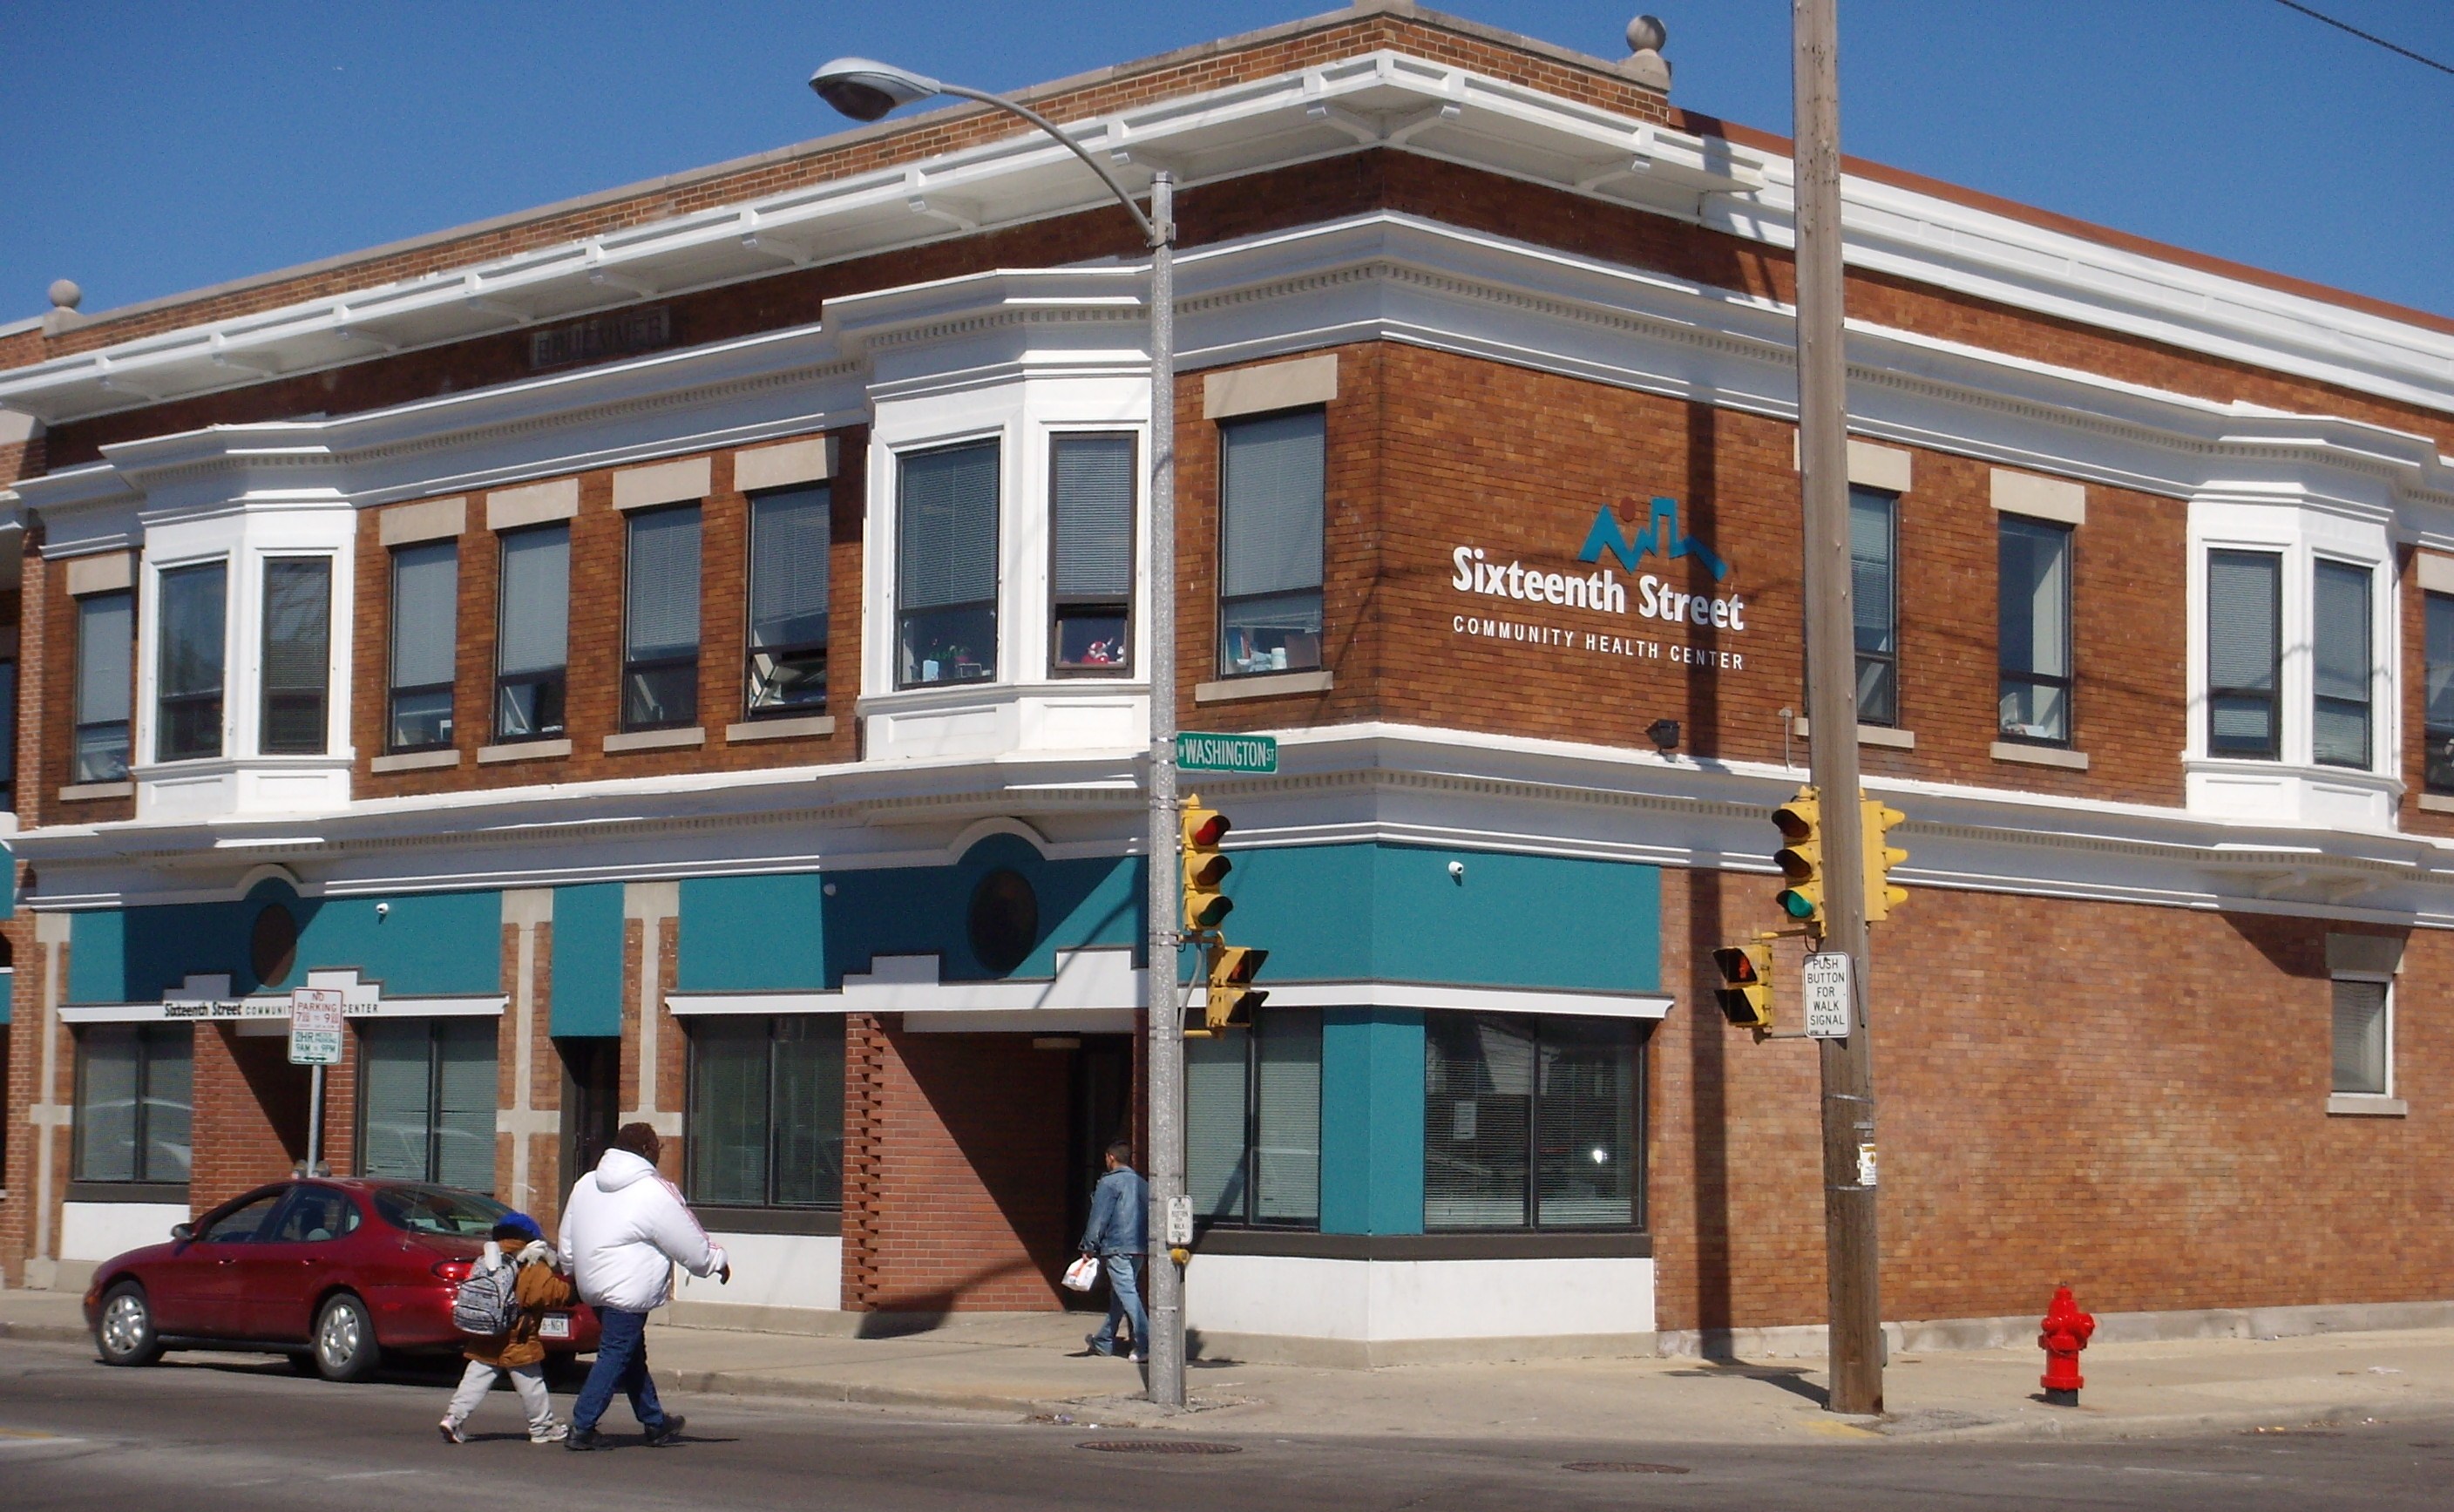 Since opening in 1969, the Sixteenth Street Community Health Care Centers have expanded to eight locations throughout the Greater Milwaukee area. Their Chavez Drive location is pictured here. 